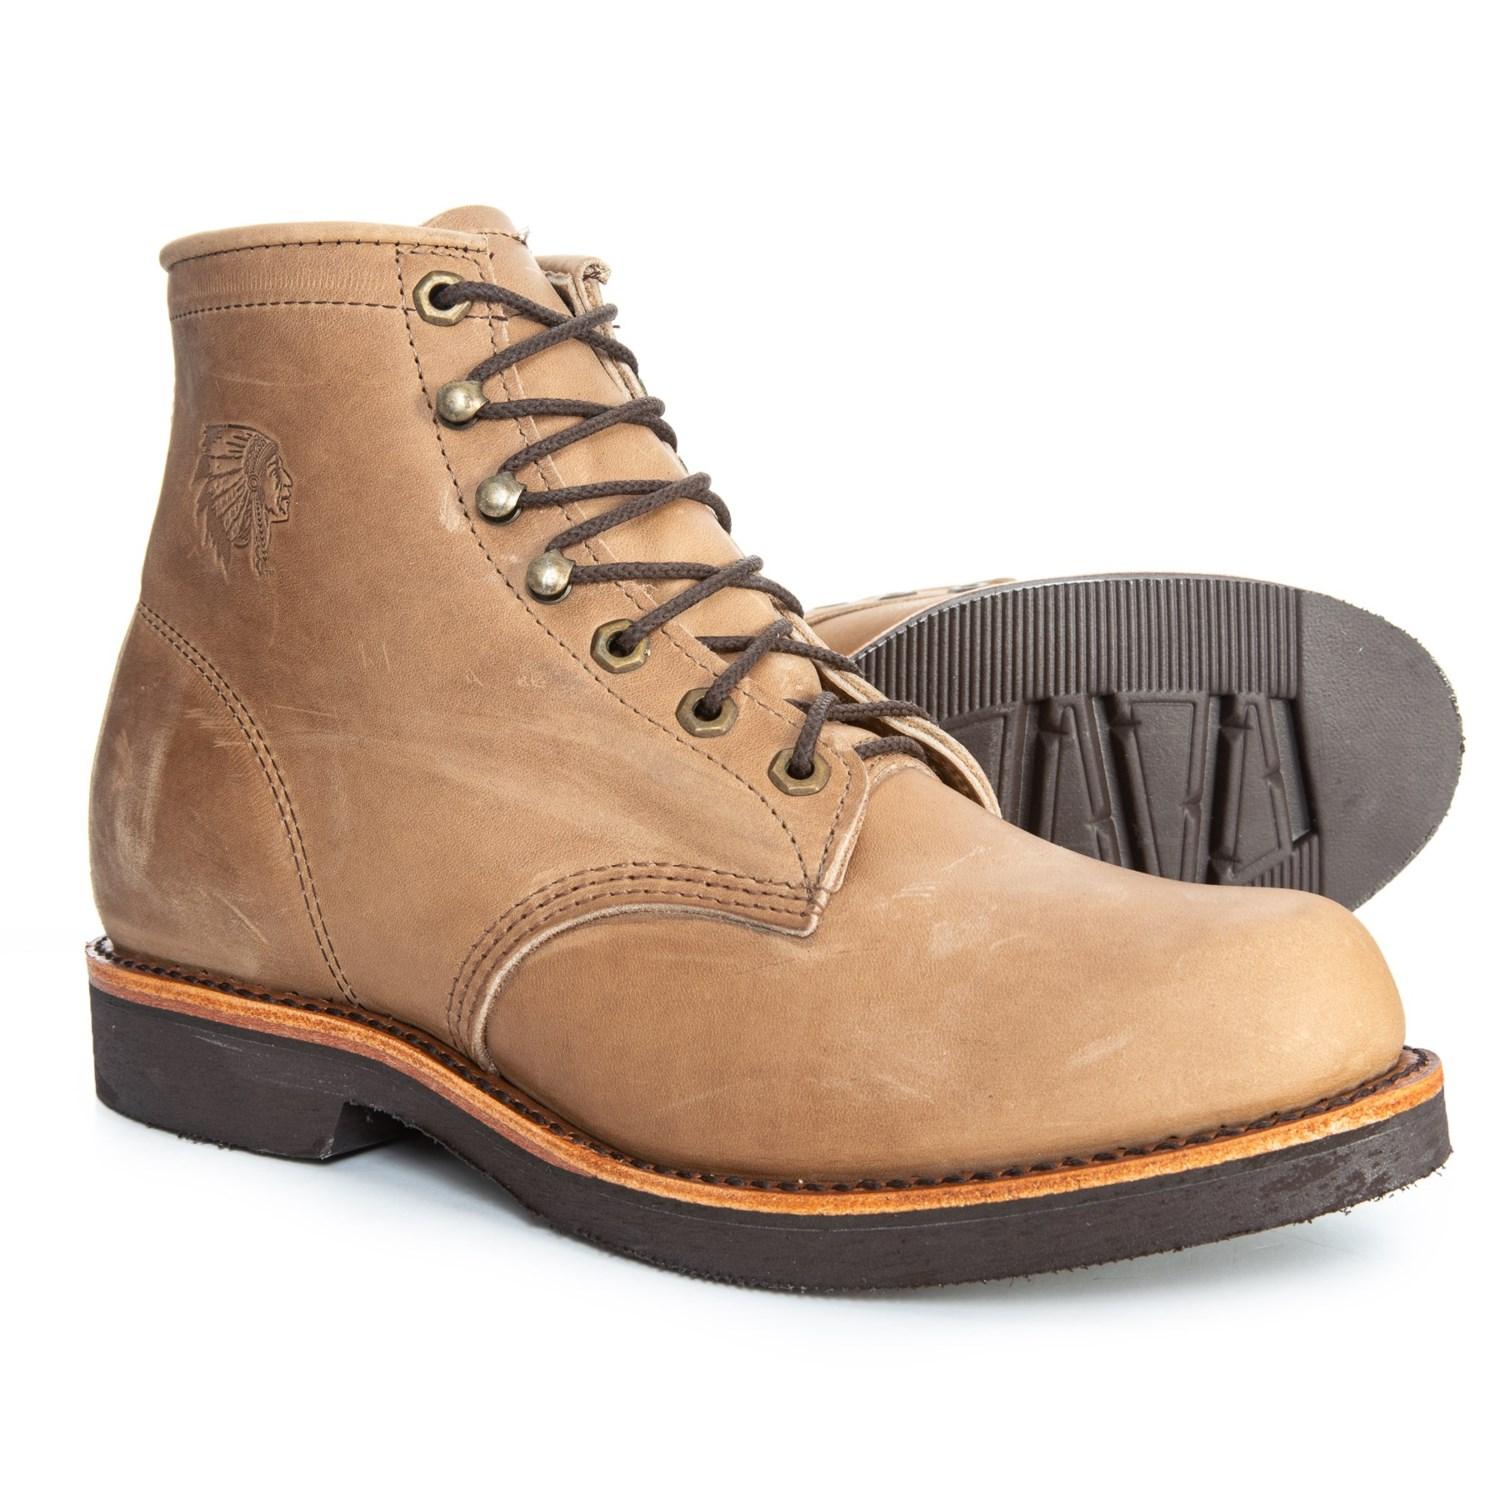 Thompson Classic Work Boots in Tan 